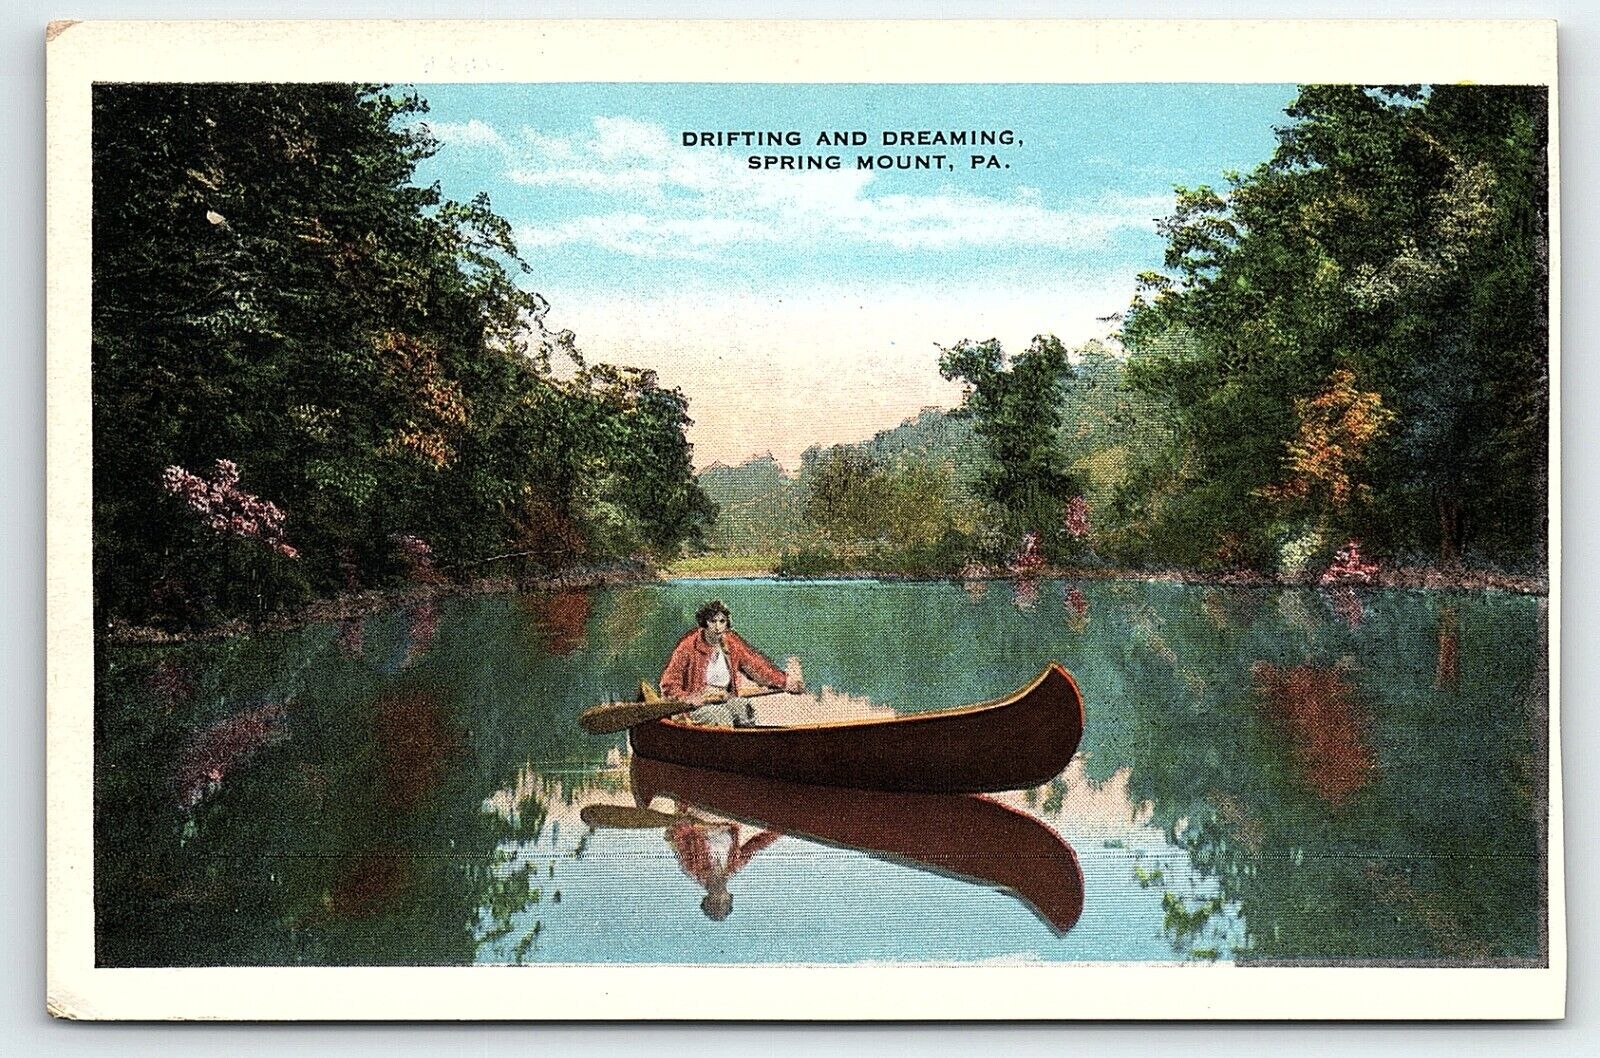 c1920 SPRING MOUNT PA DRIFTING AND DREAMING LADY IN CANOE  POSTCARD P4100